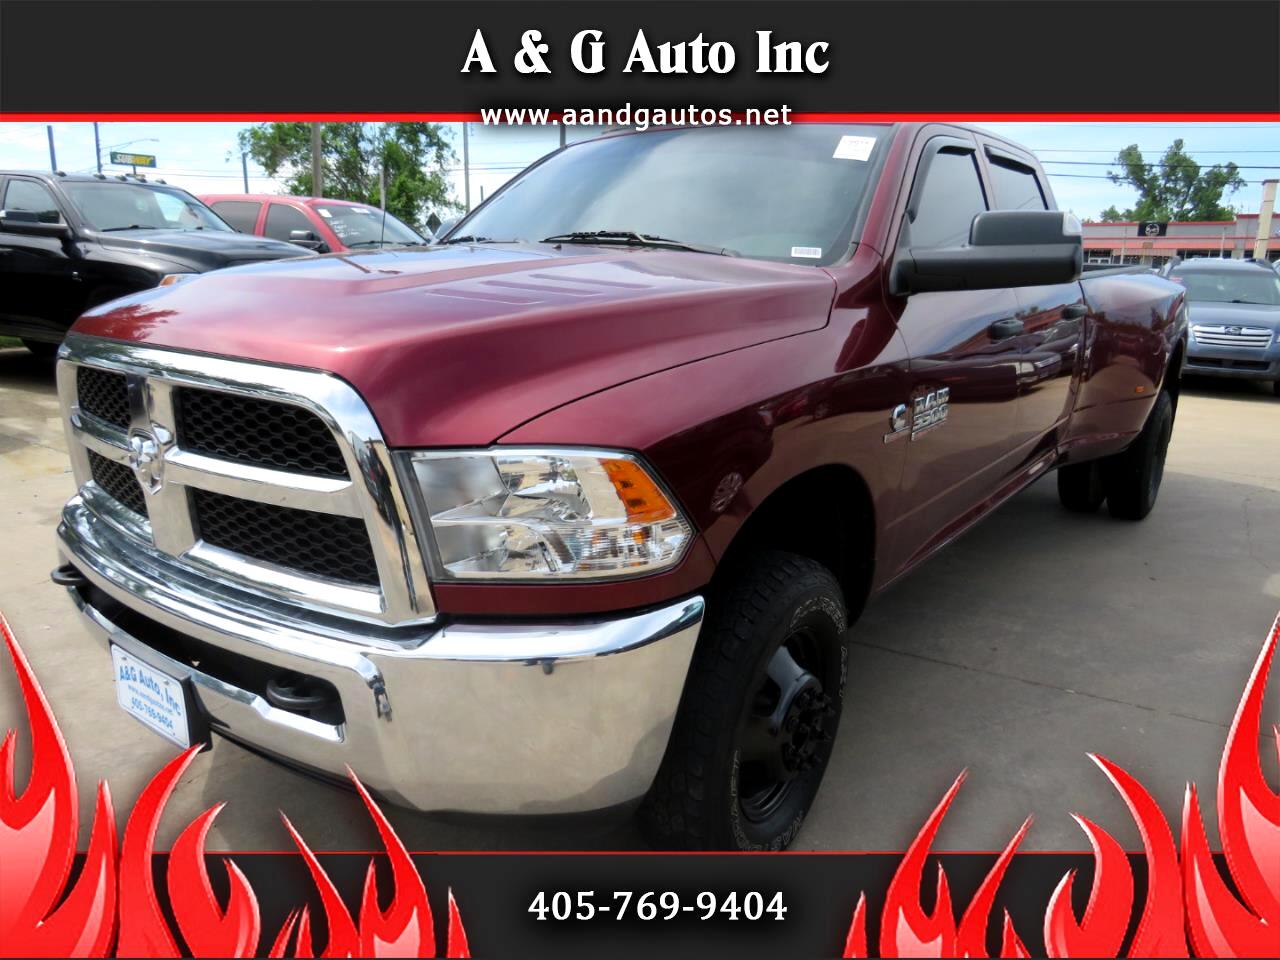 2018 Dodge Ram 3500 for sale in Oklahoma City OK 73141 by A & G Auto Inc